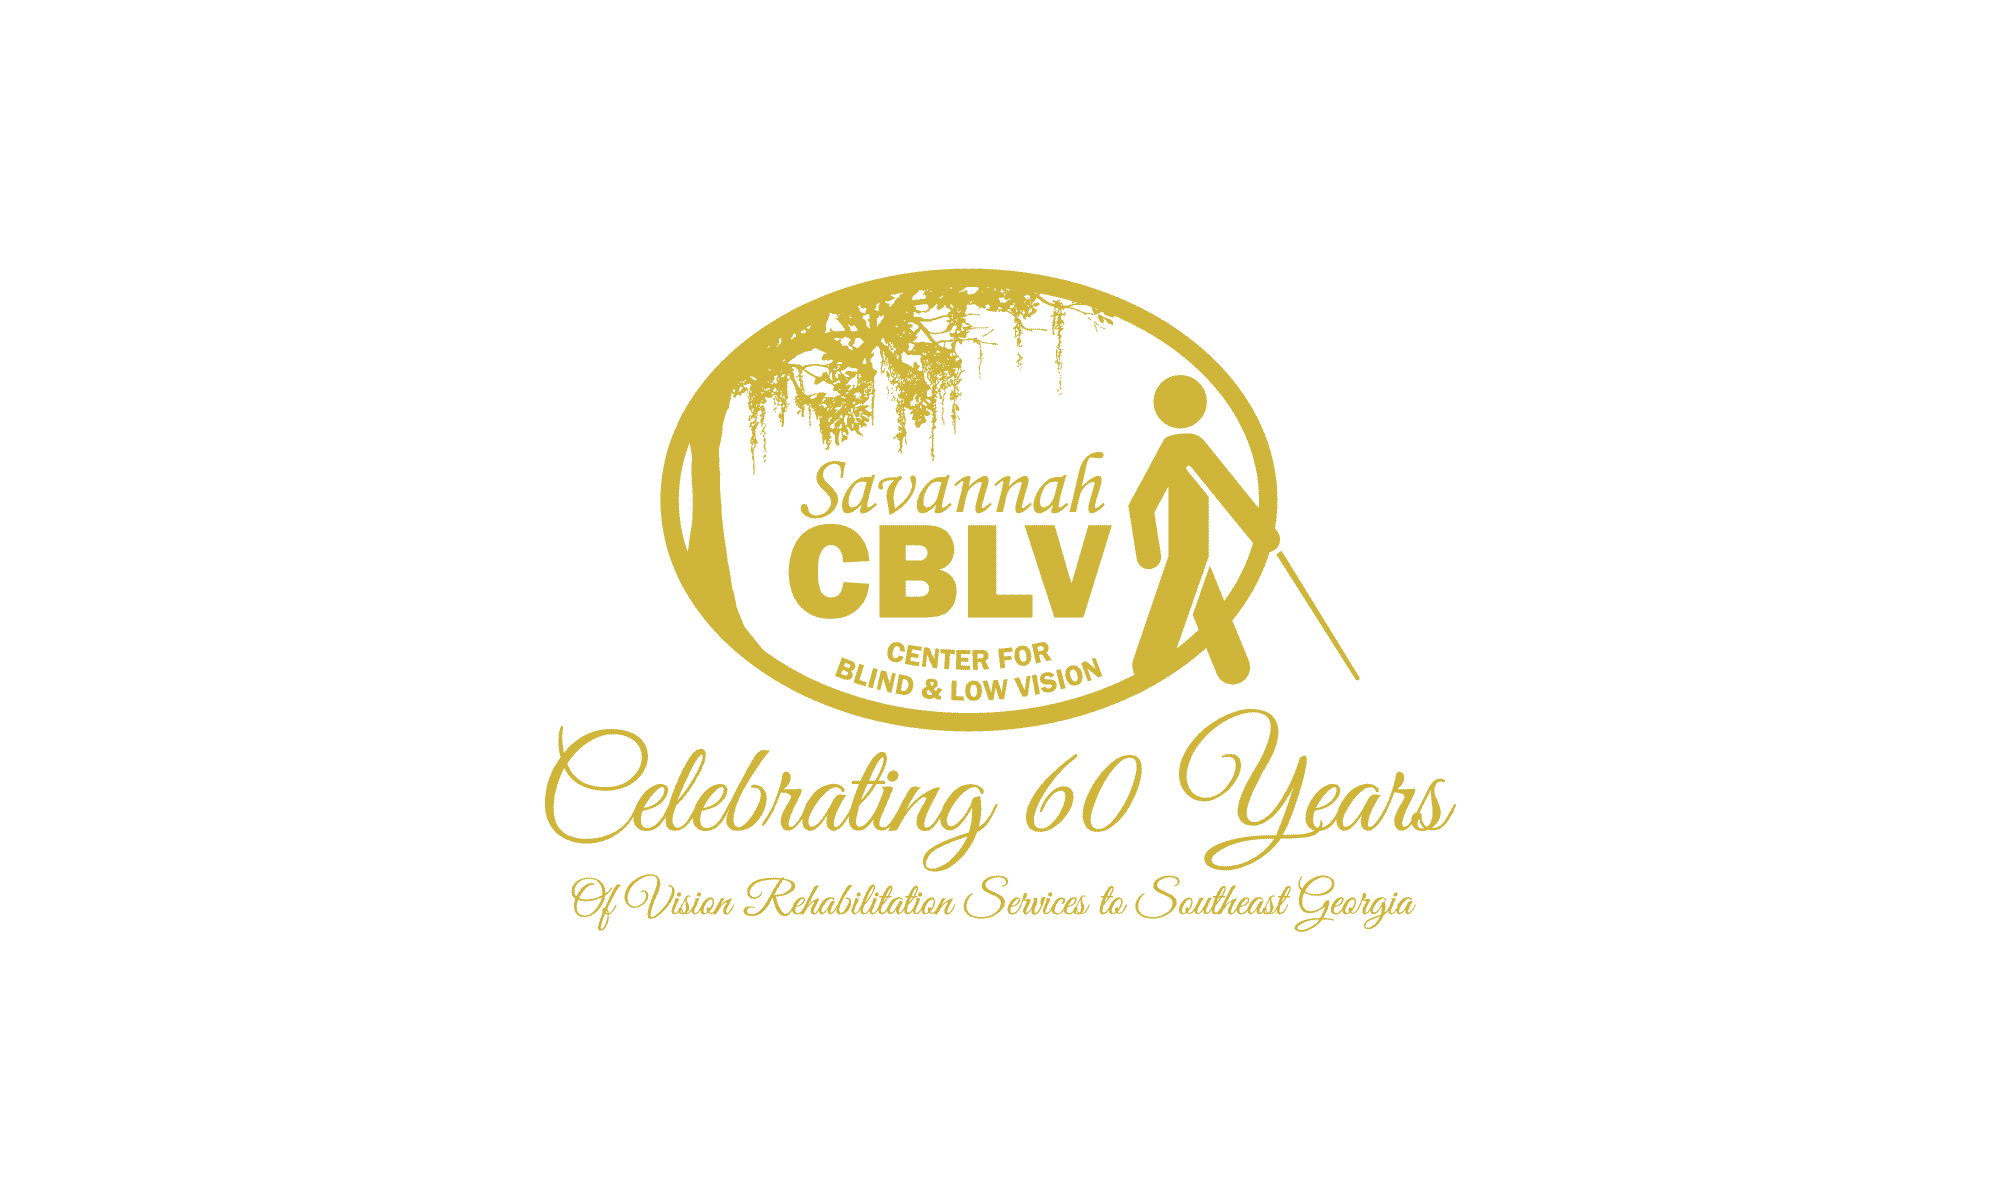 Savannah Center for Blind and Low Vision 60th Anniversary Logo